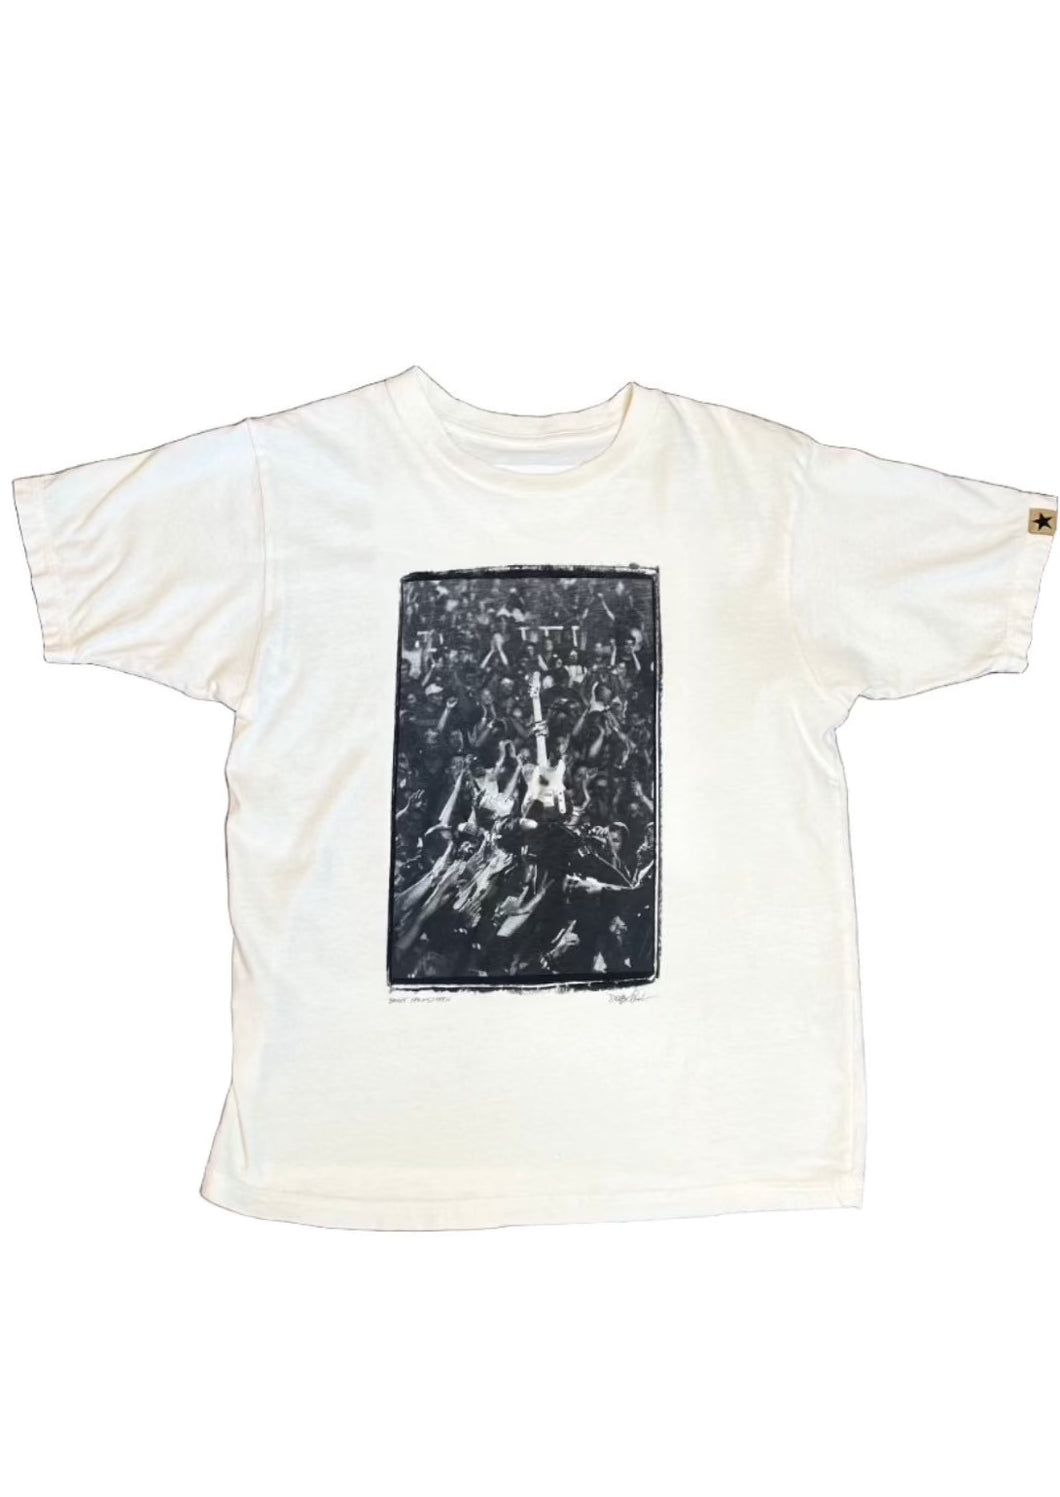 Bruce Springsteen Concert Tee, available at west2westport.com